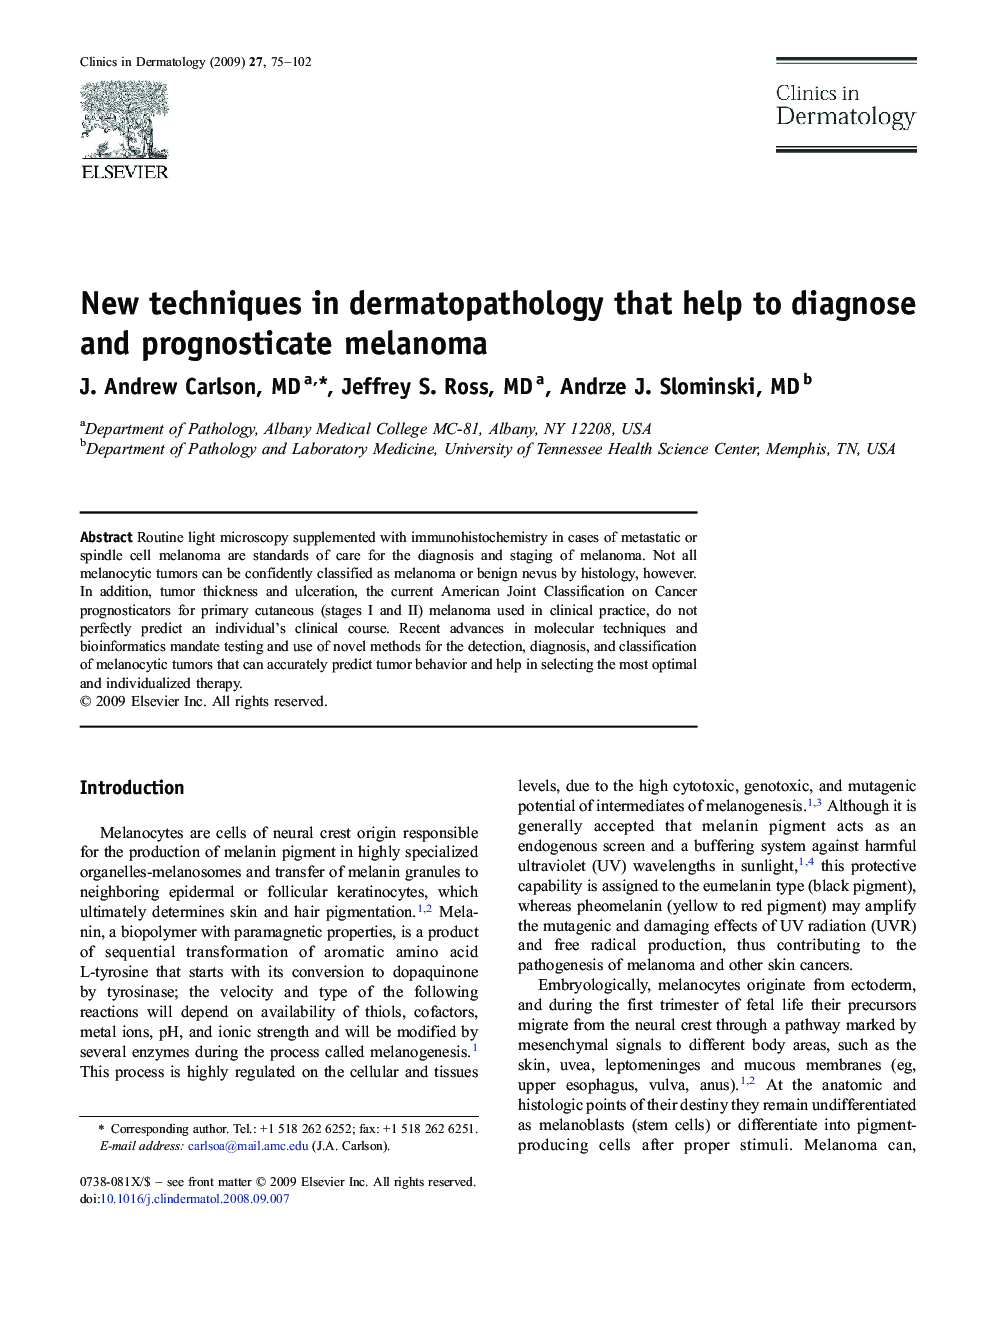 New techniques in dermatopathology that help to diagnose and prognosticate melanoma